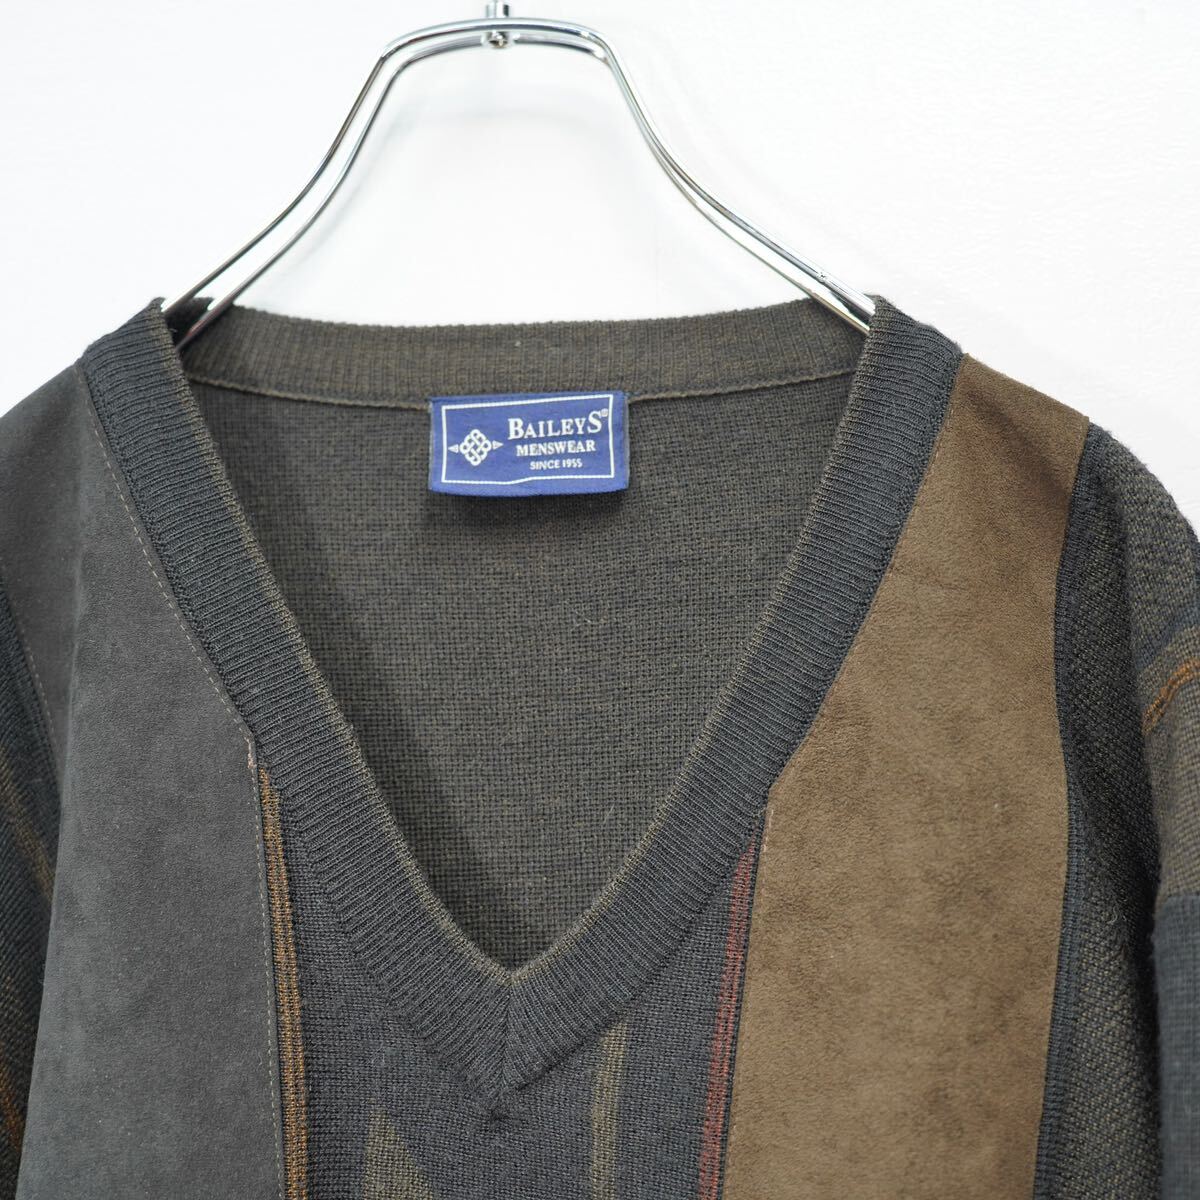 EU VINTAGE BAILEYS MENSWEAR FAKE SUEDE SWITCHED DESIGN KNIT MADE IN ITALY/ヨーロッパ古着フェイクスウェード切替デザインニット_画像6